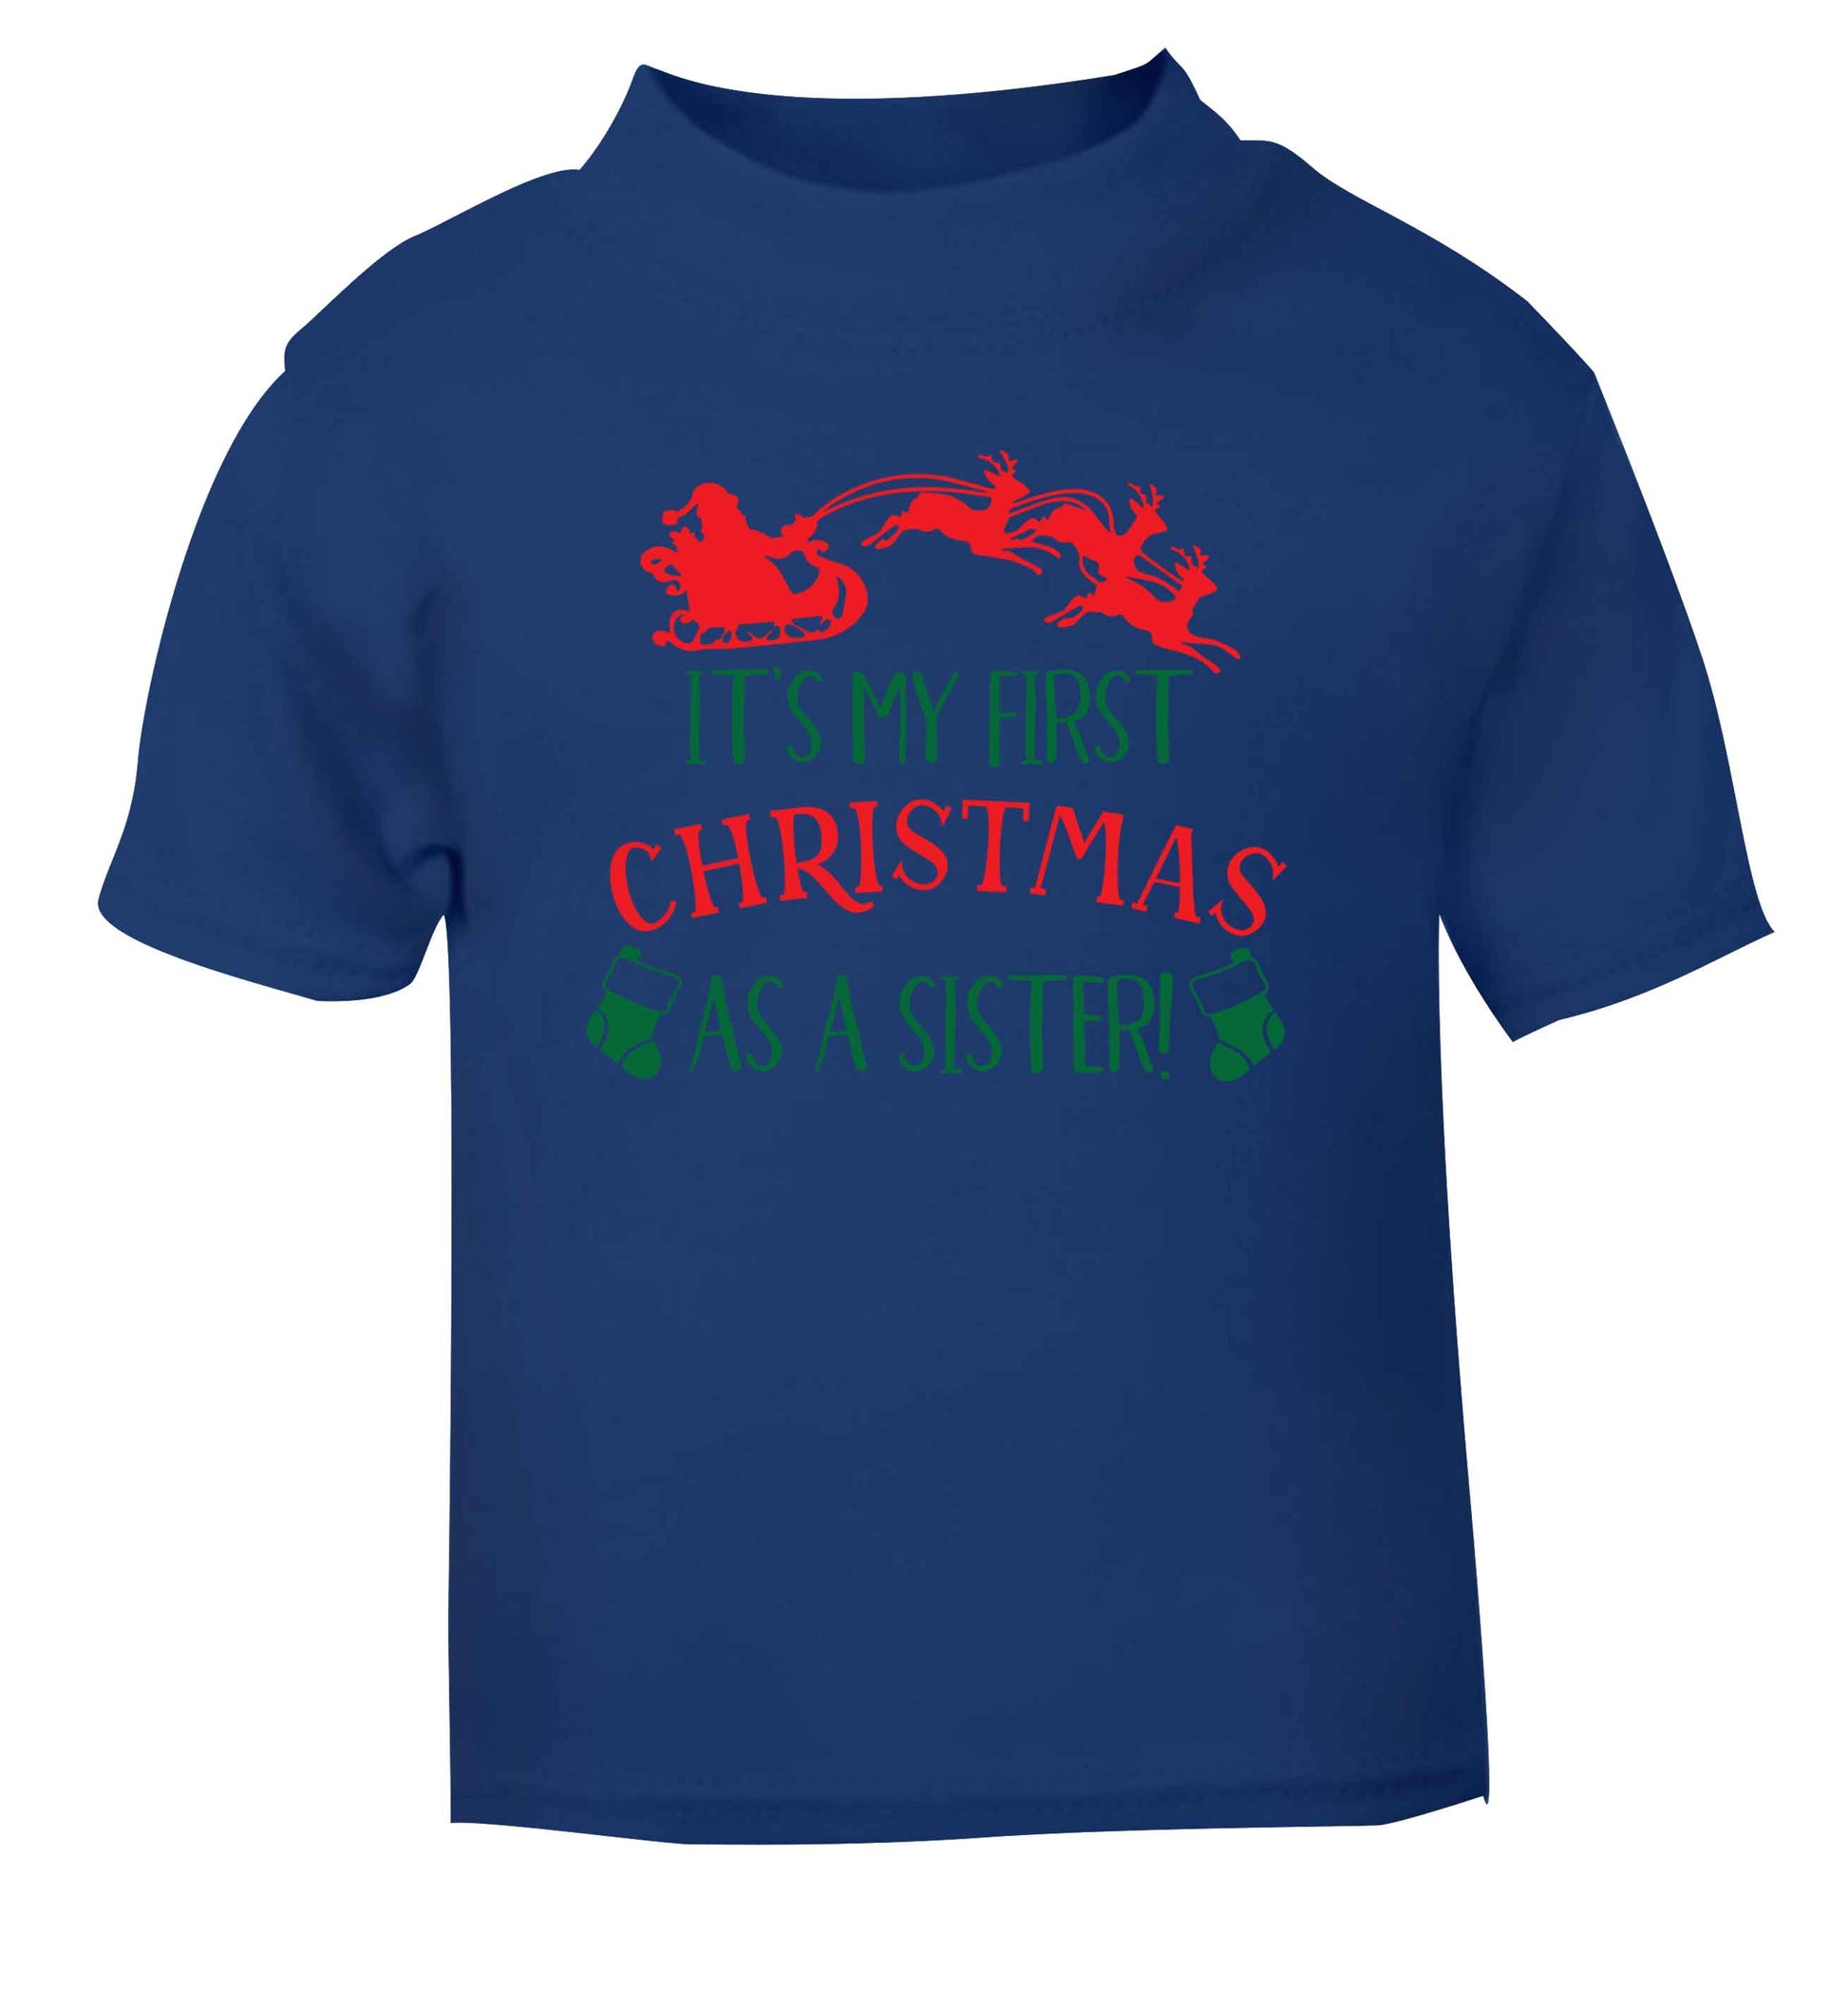 It's my first Christmas as a sister! blue Baby Toddler Tshirt 2 Years